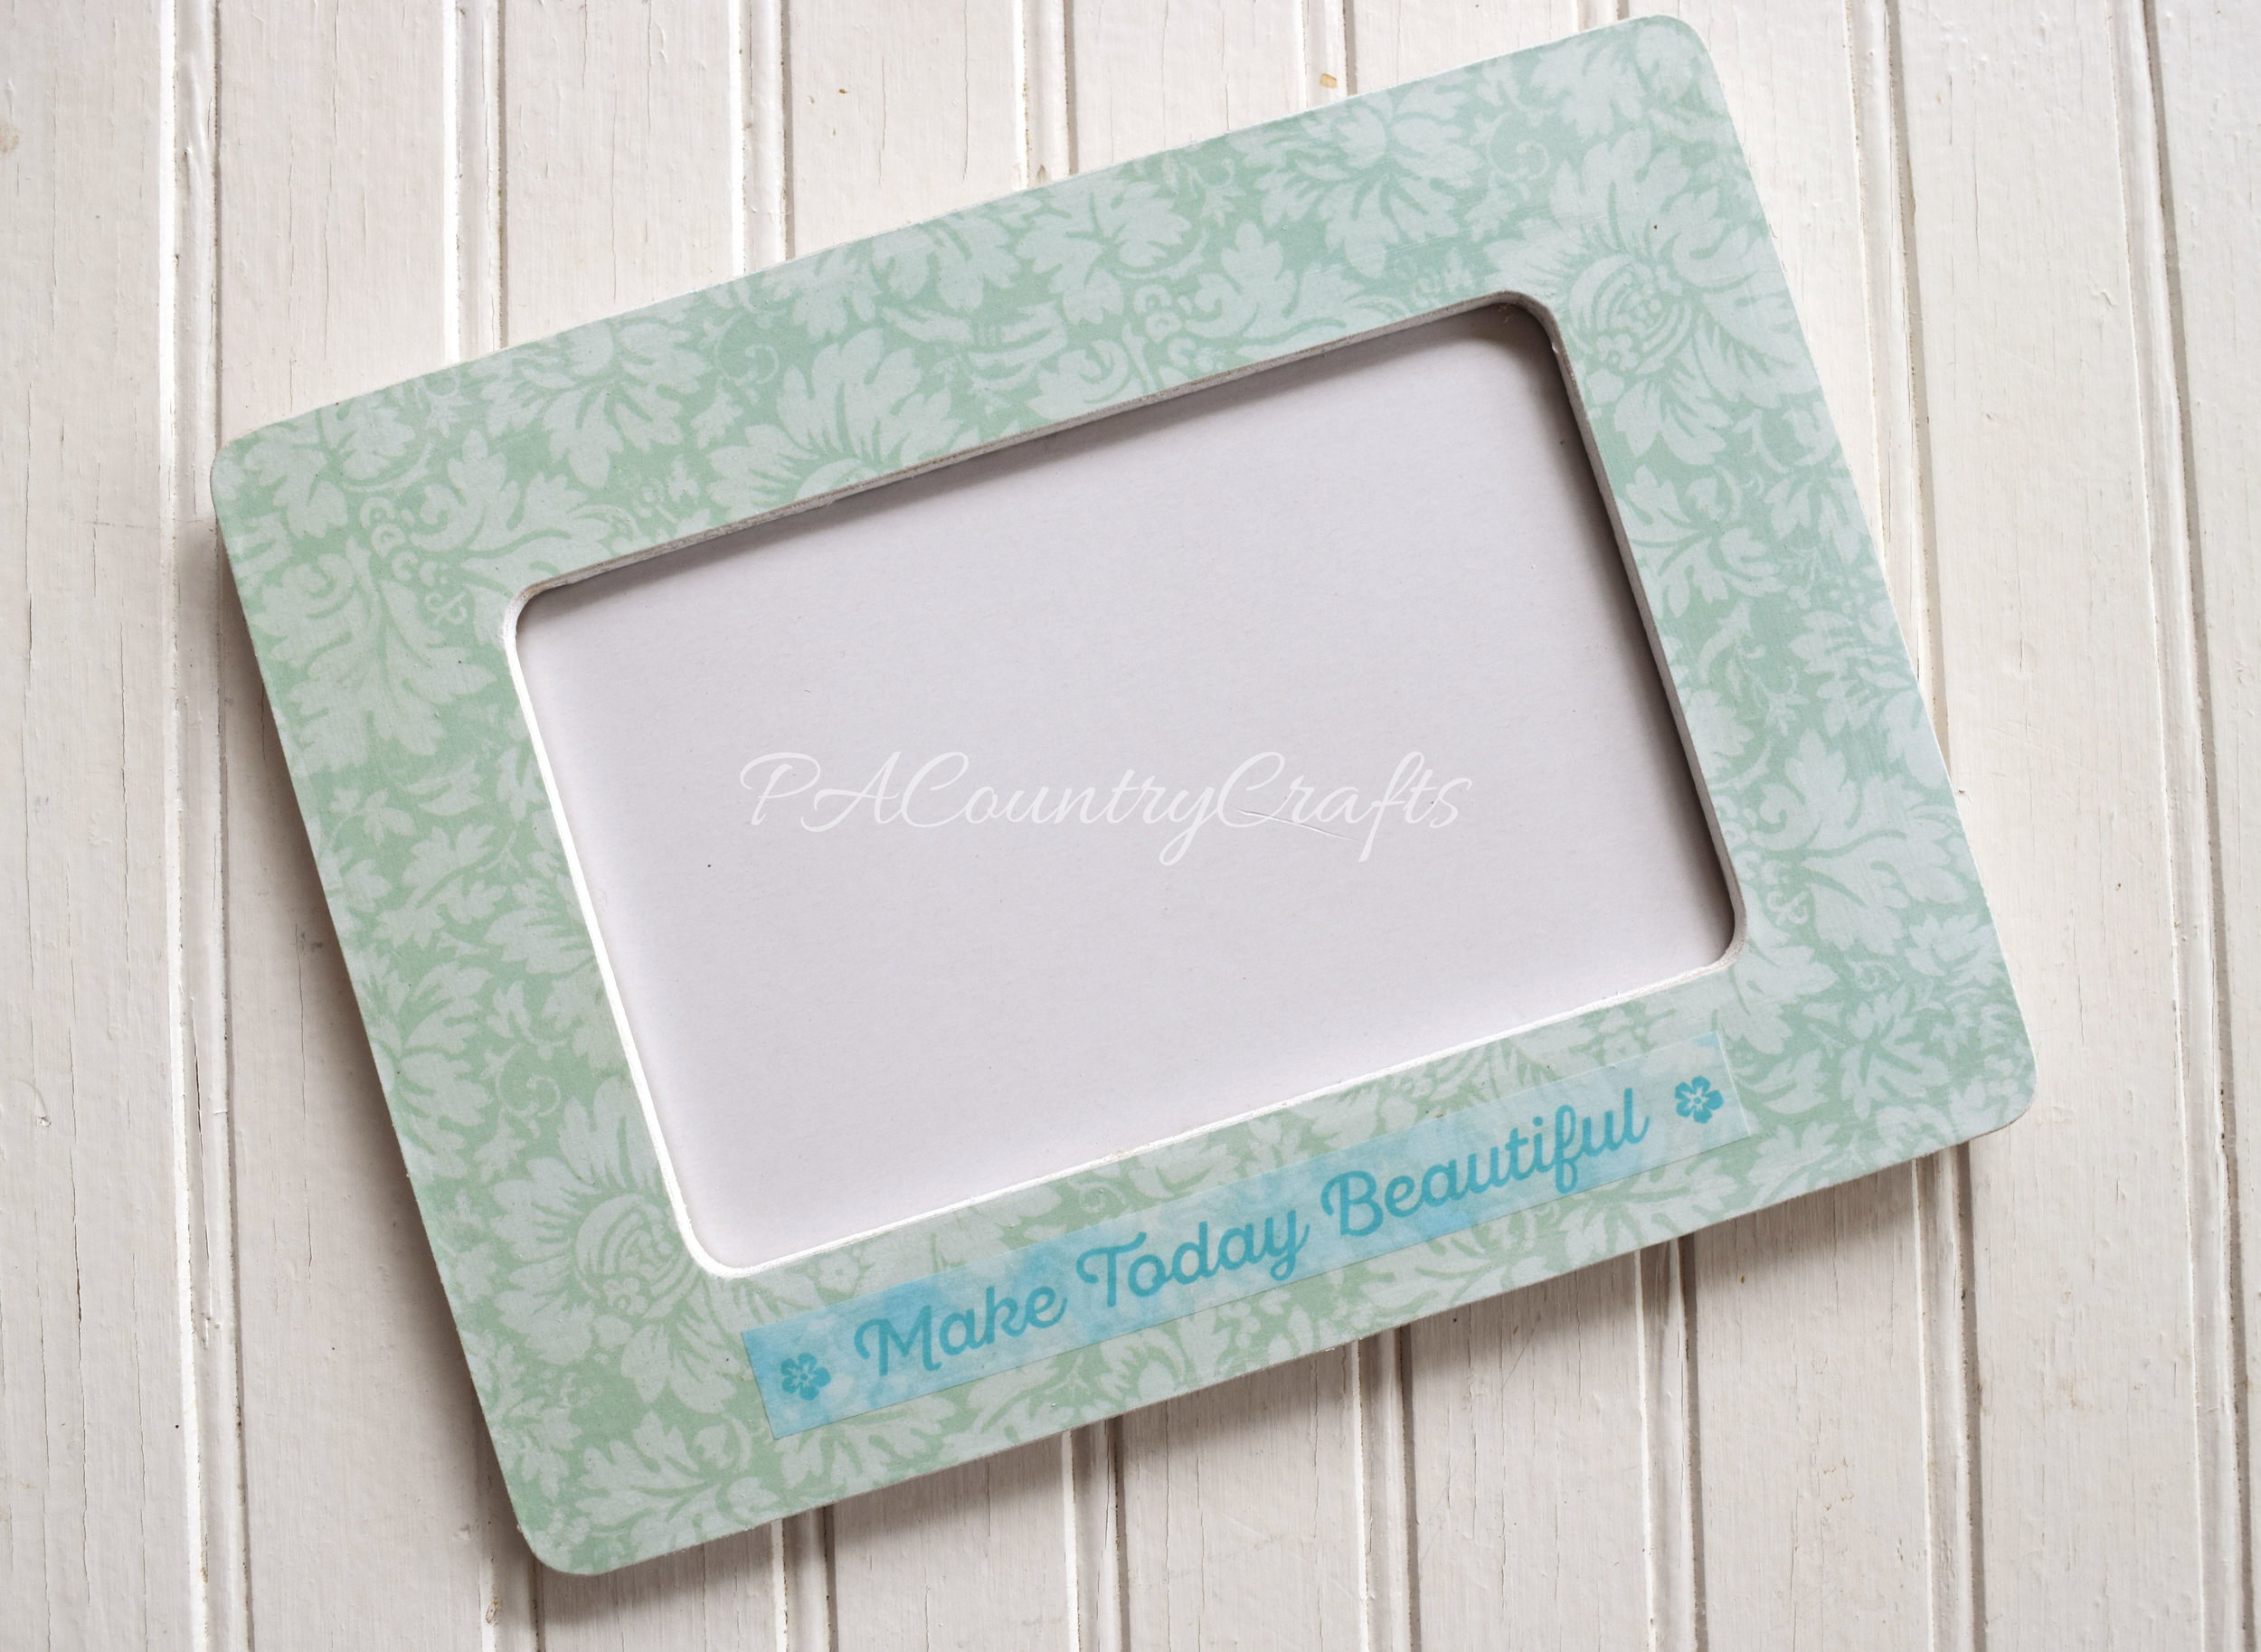 Mod podge, scrapbook paper, and washi tape make this cute frame!